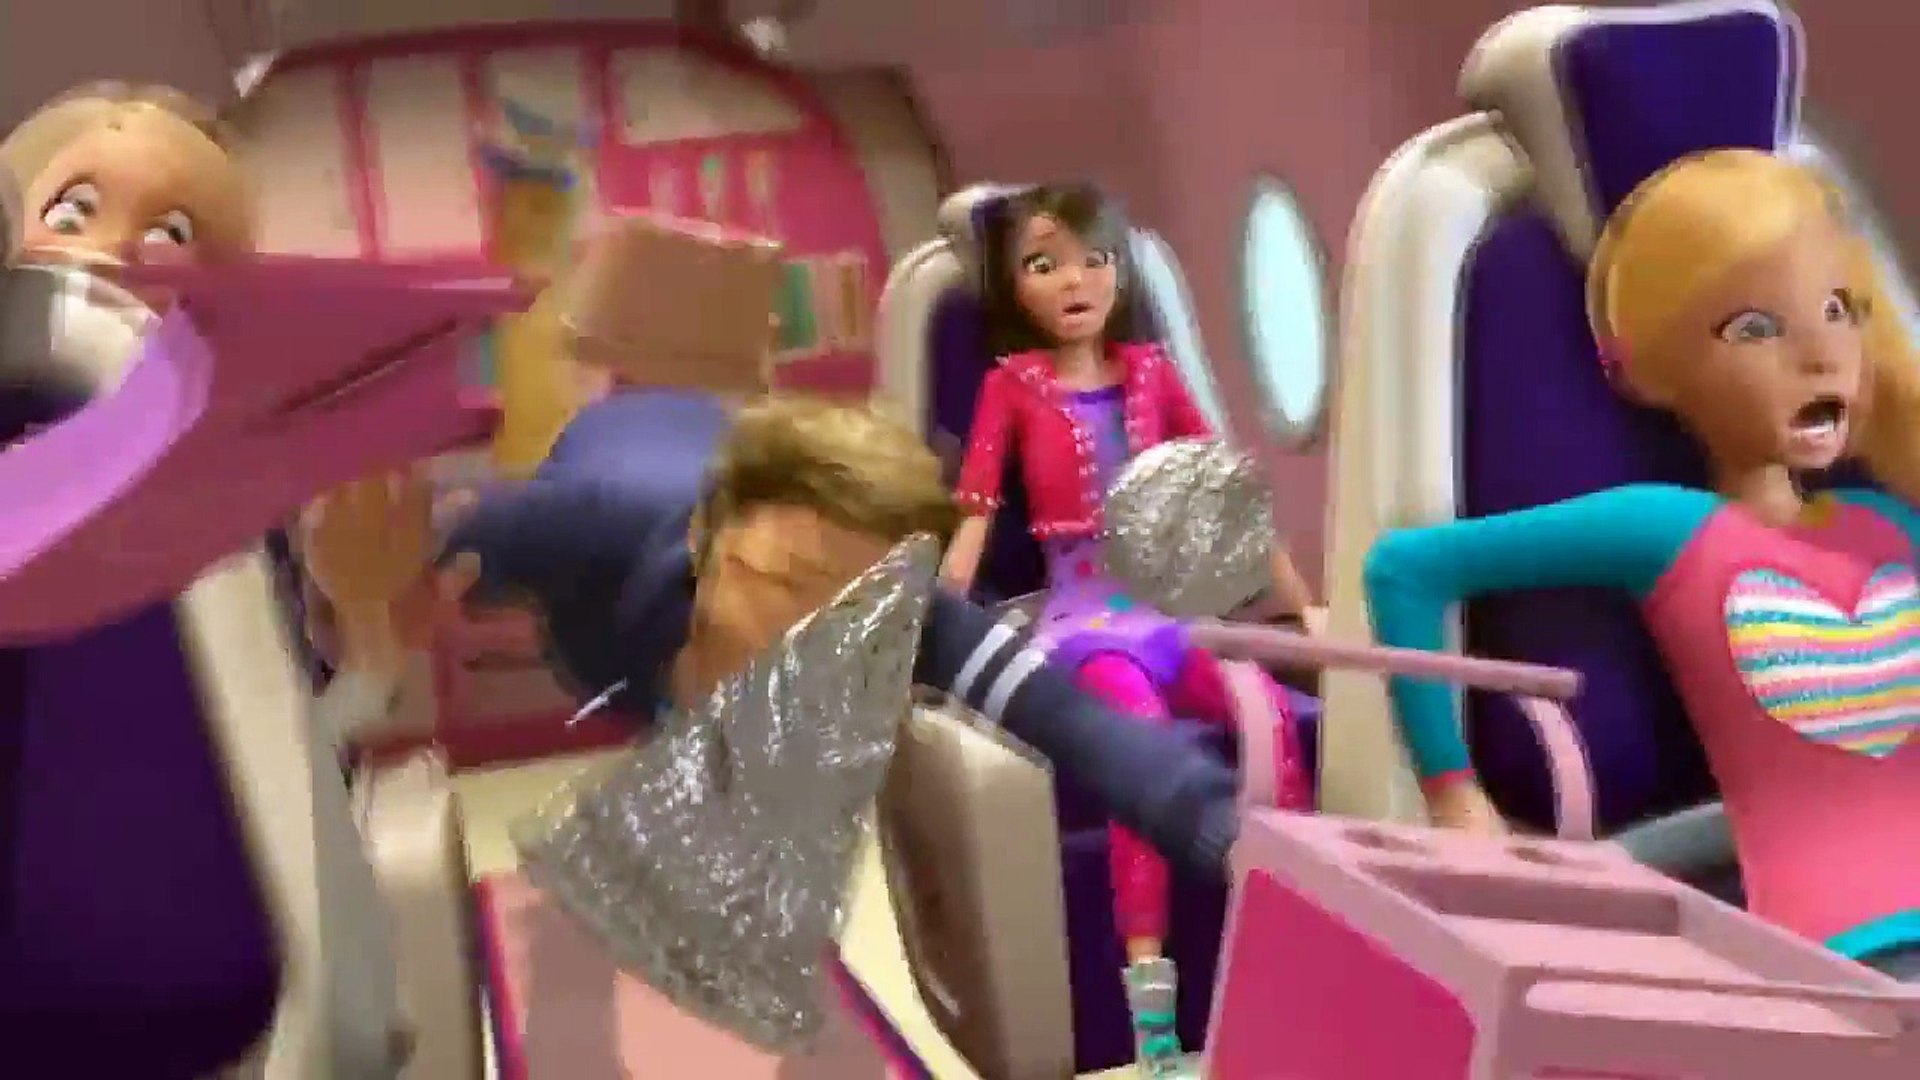 Barbie: Life in the Dreamhouse - streaming online